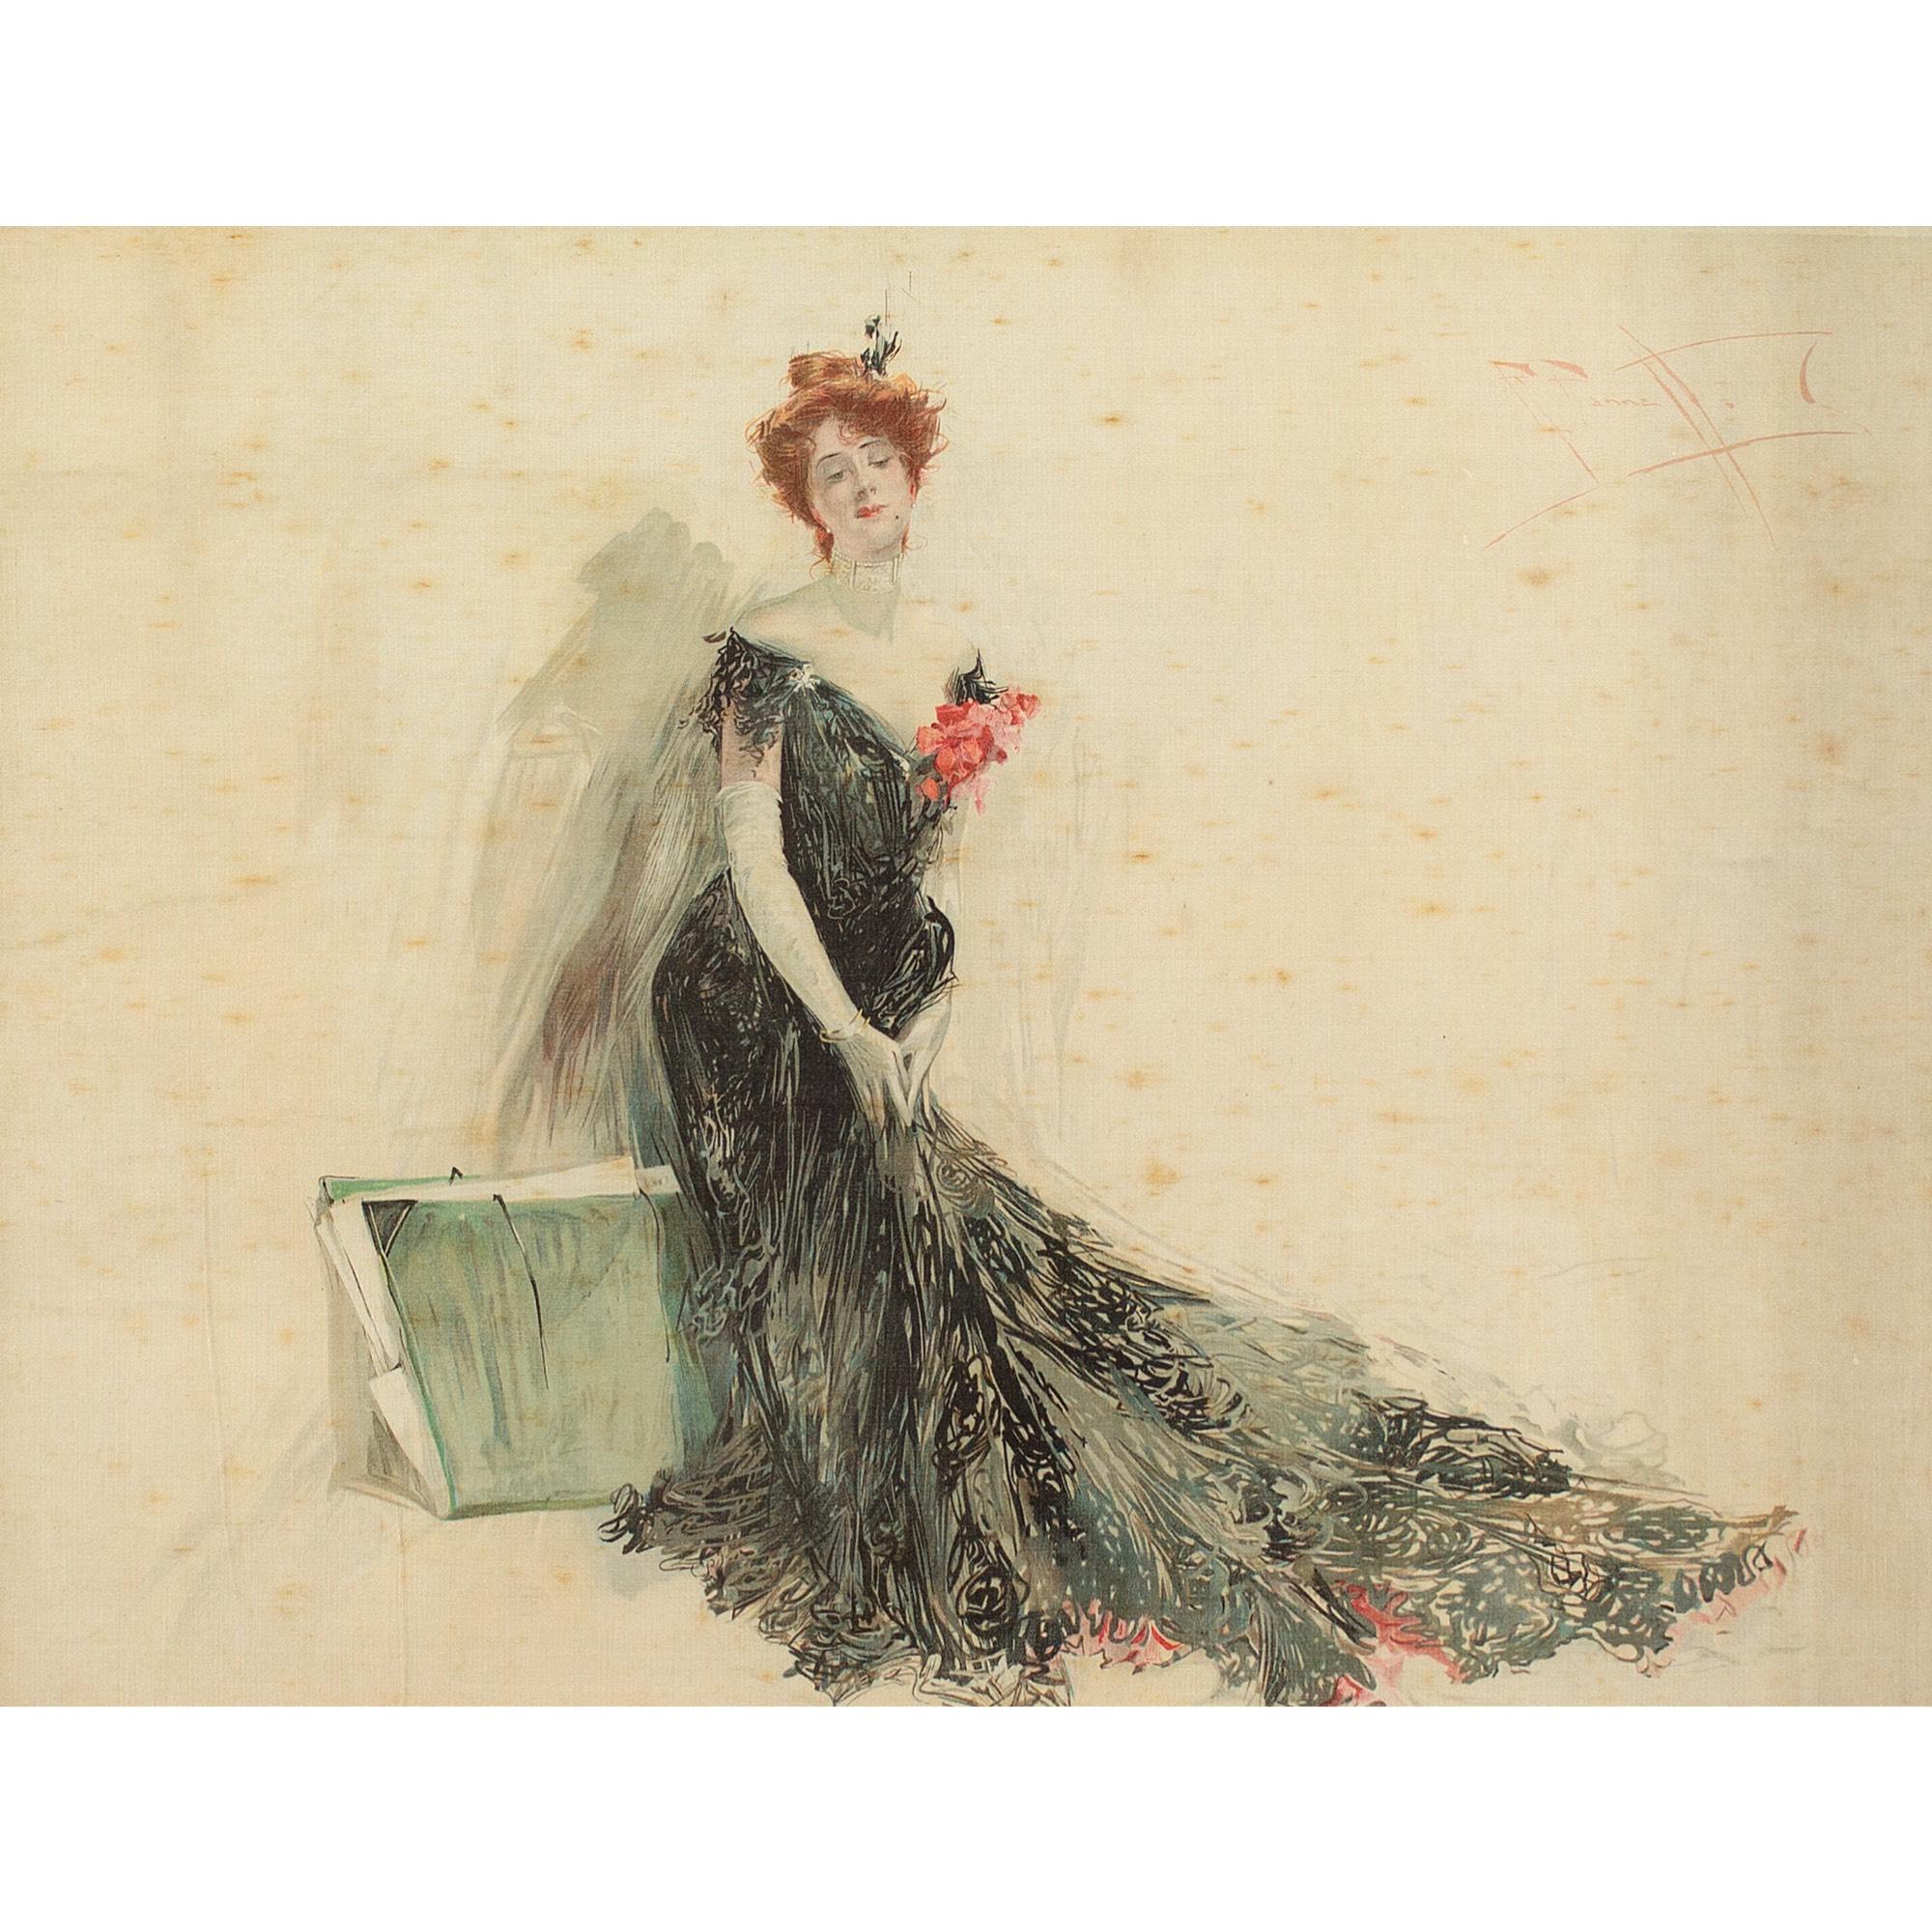 This early 20th-century watercolour and gouache by British artist Reginald Pannett (1875-1924) depicts an Edwardian lady in a sumptuous black dress and white gloves.

Pannett was immersed in the heady world of theatre from an early age as his